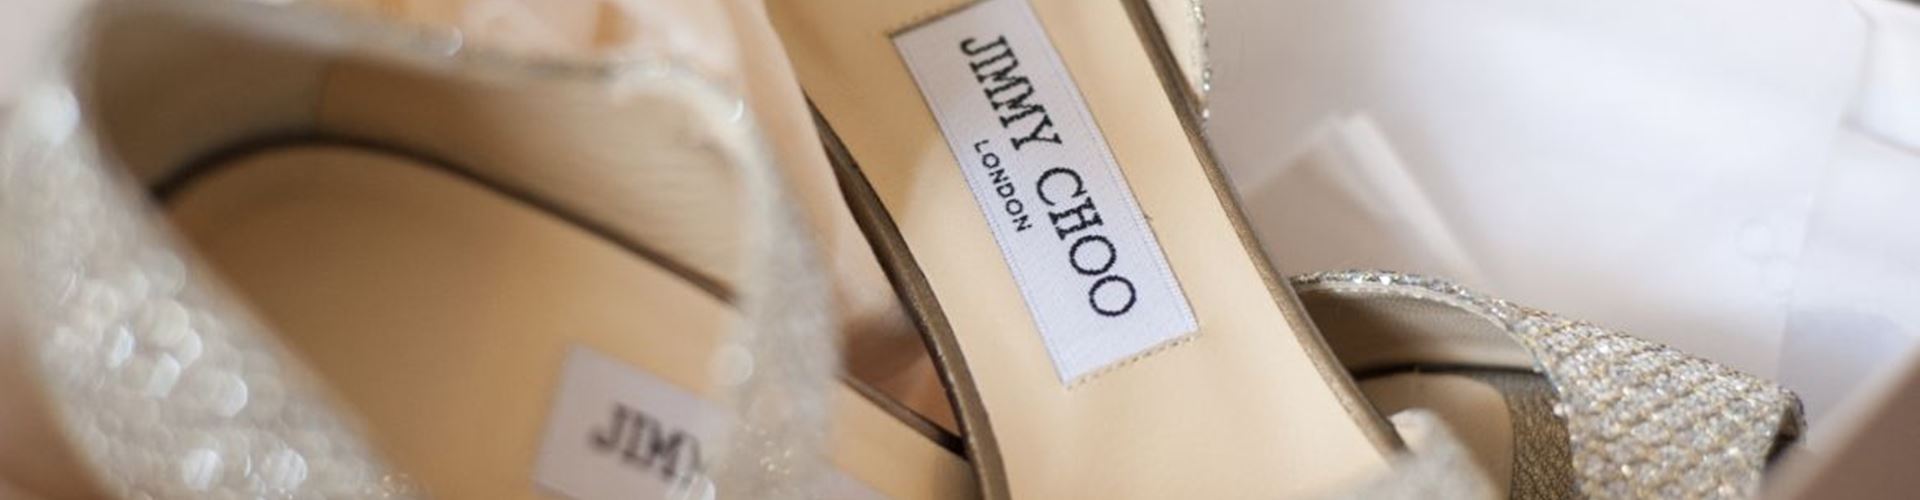 Jimmy Choo IPO could value luxury shoe maker at $1.1 billion